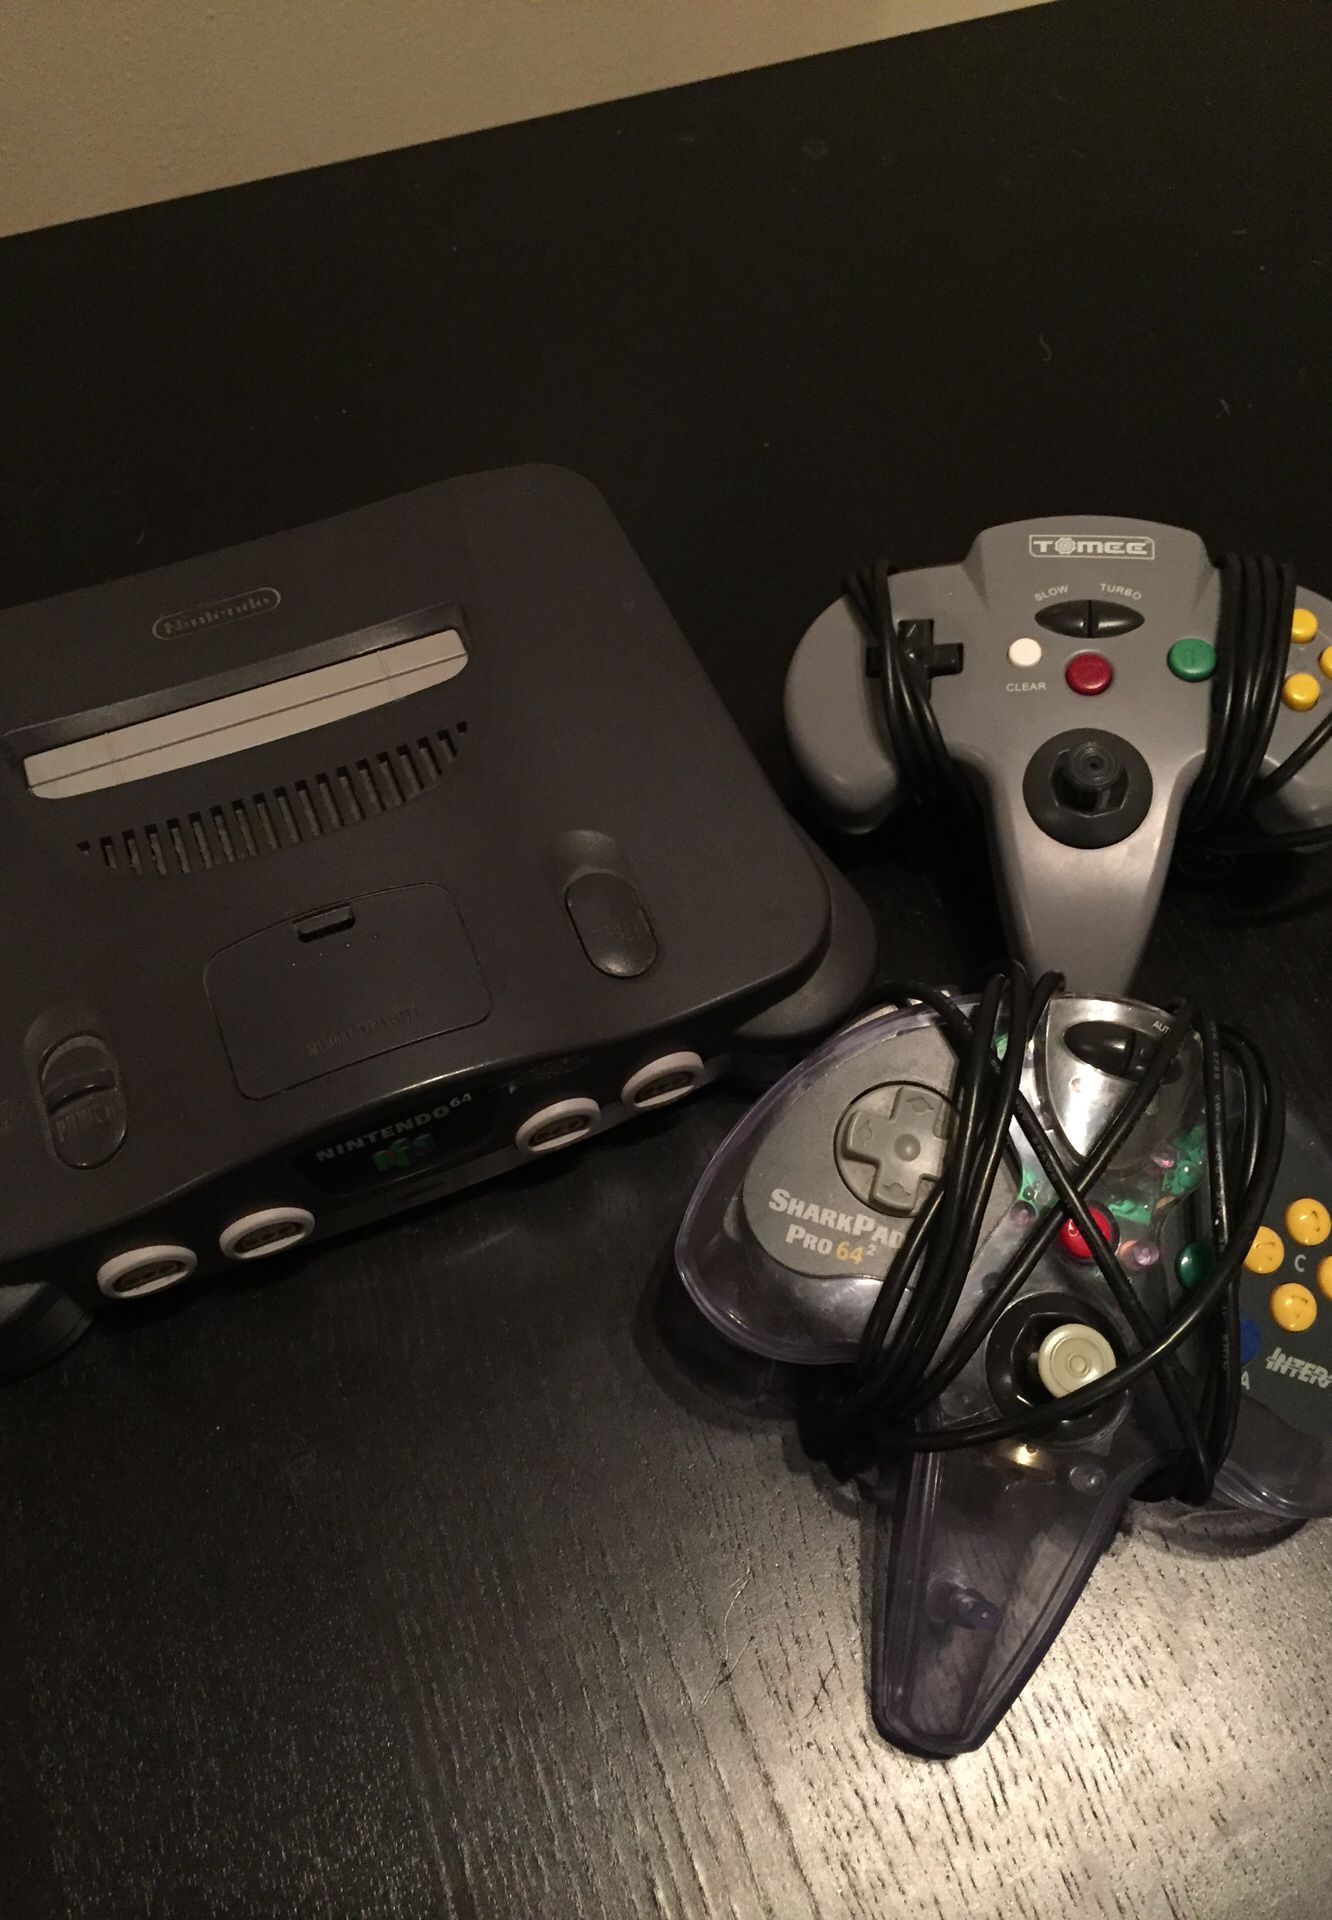 Nintendo 64 with cords and controllers